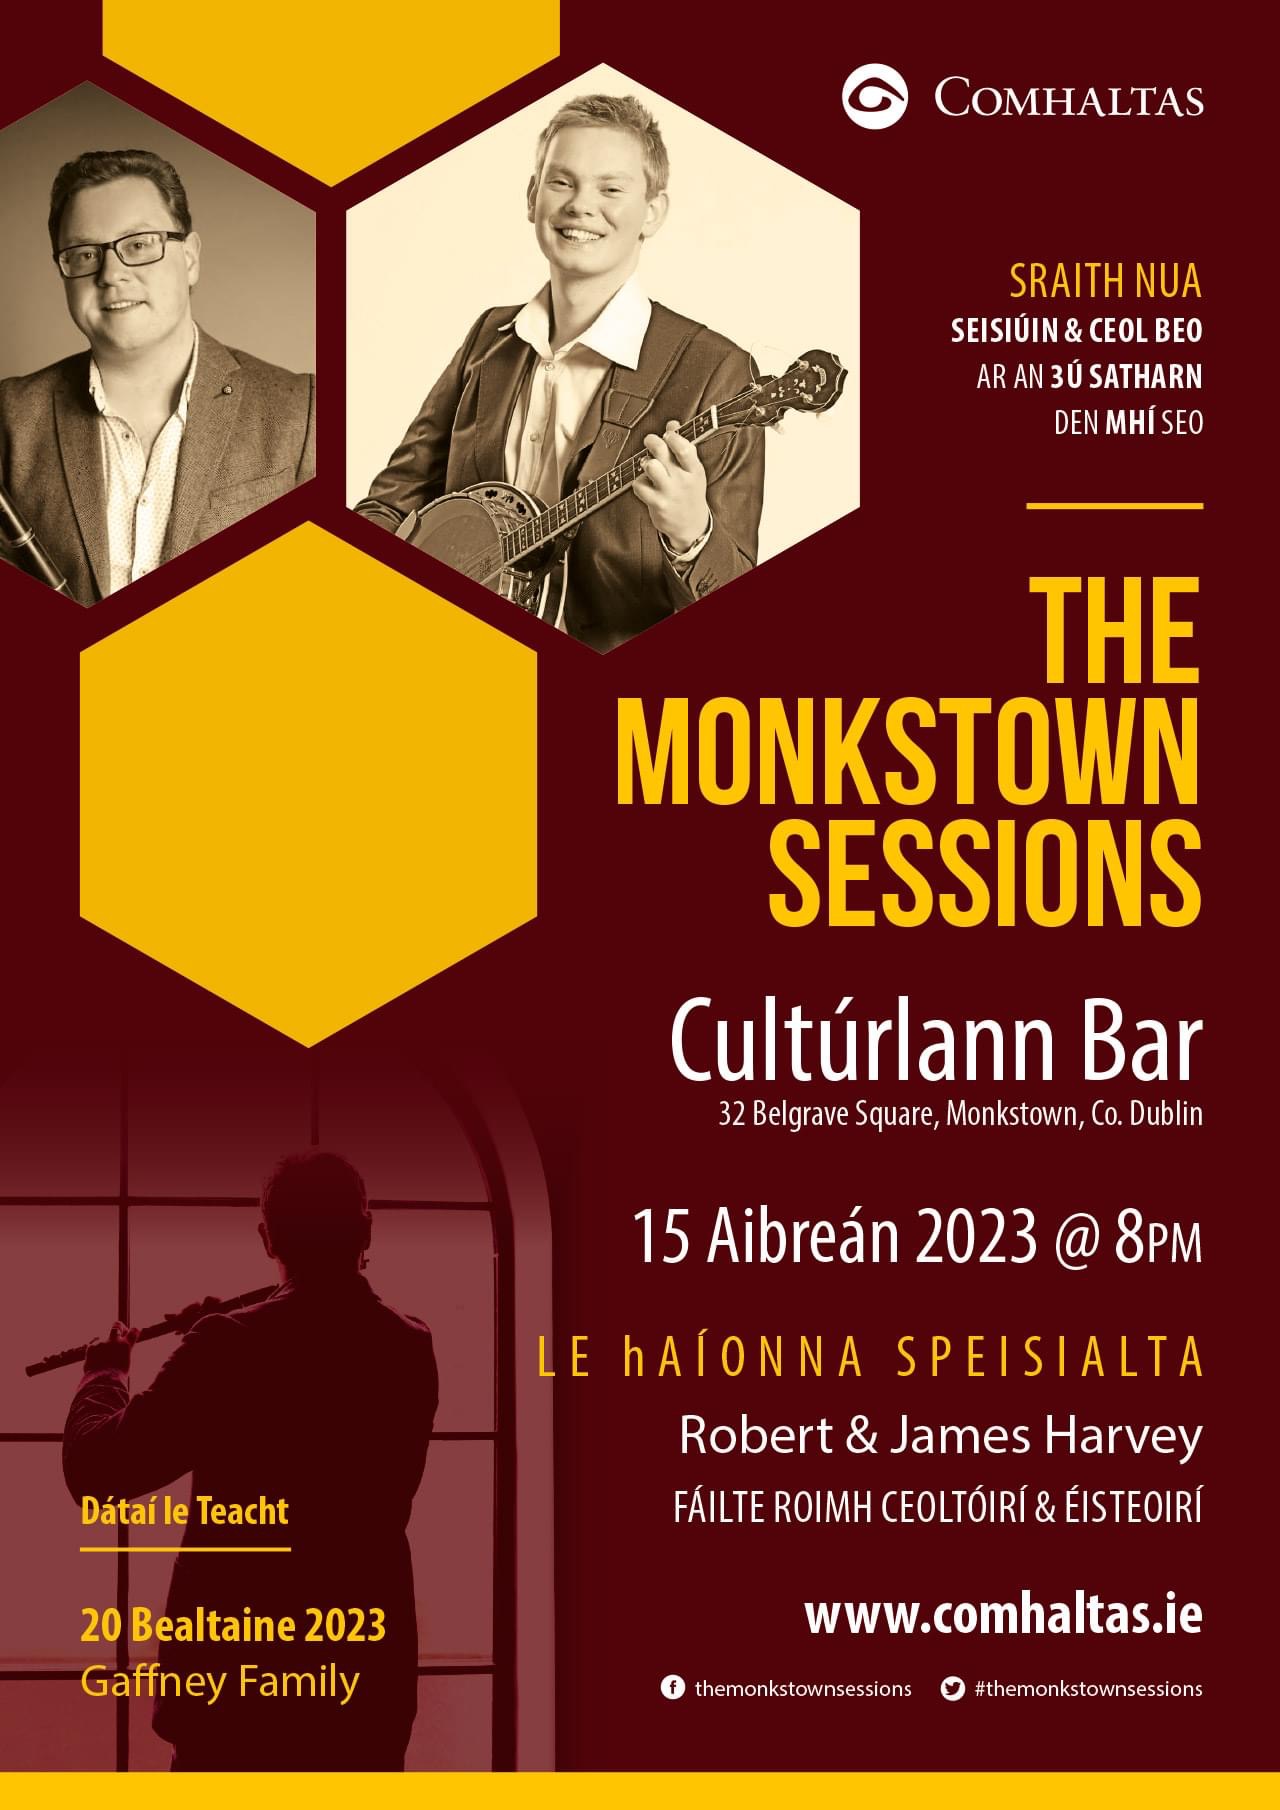 The Monkstown Sessions